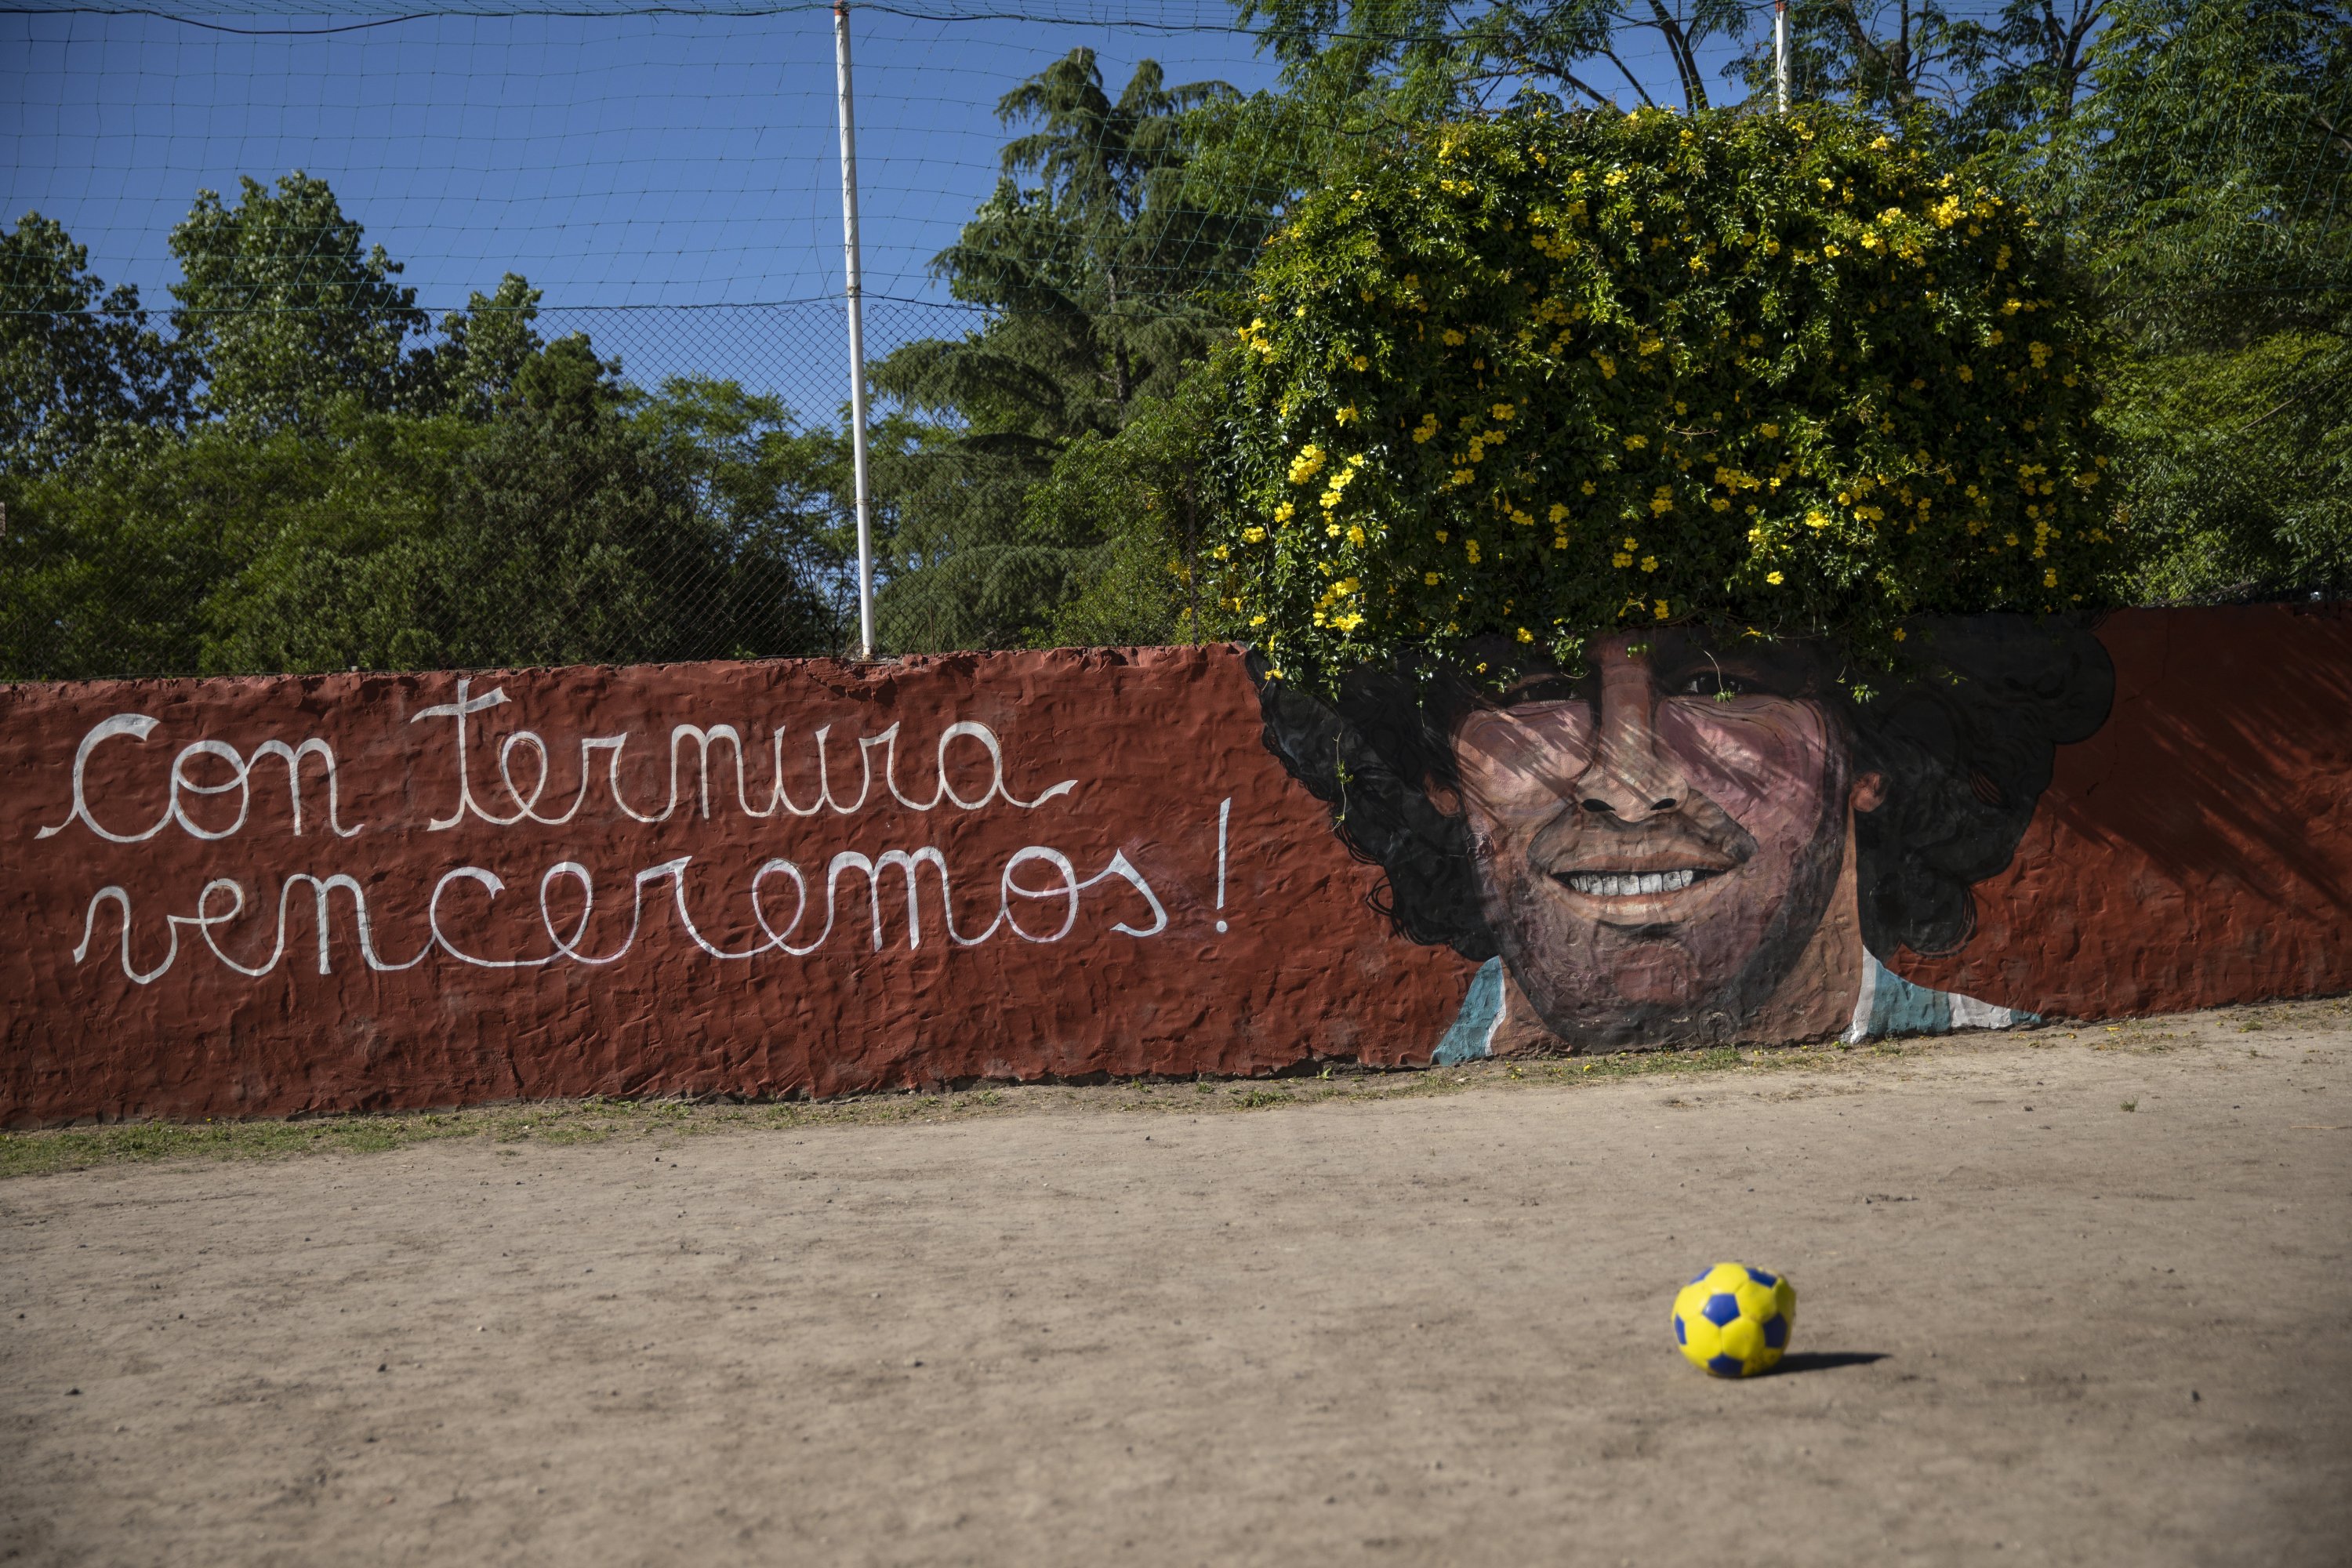 A mural depicting late Argentine football icon Diego Maradona is seen in Buenos Aires, Argentina, Nov. 24, 2021. (AP Photo)